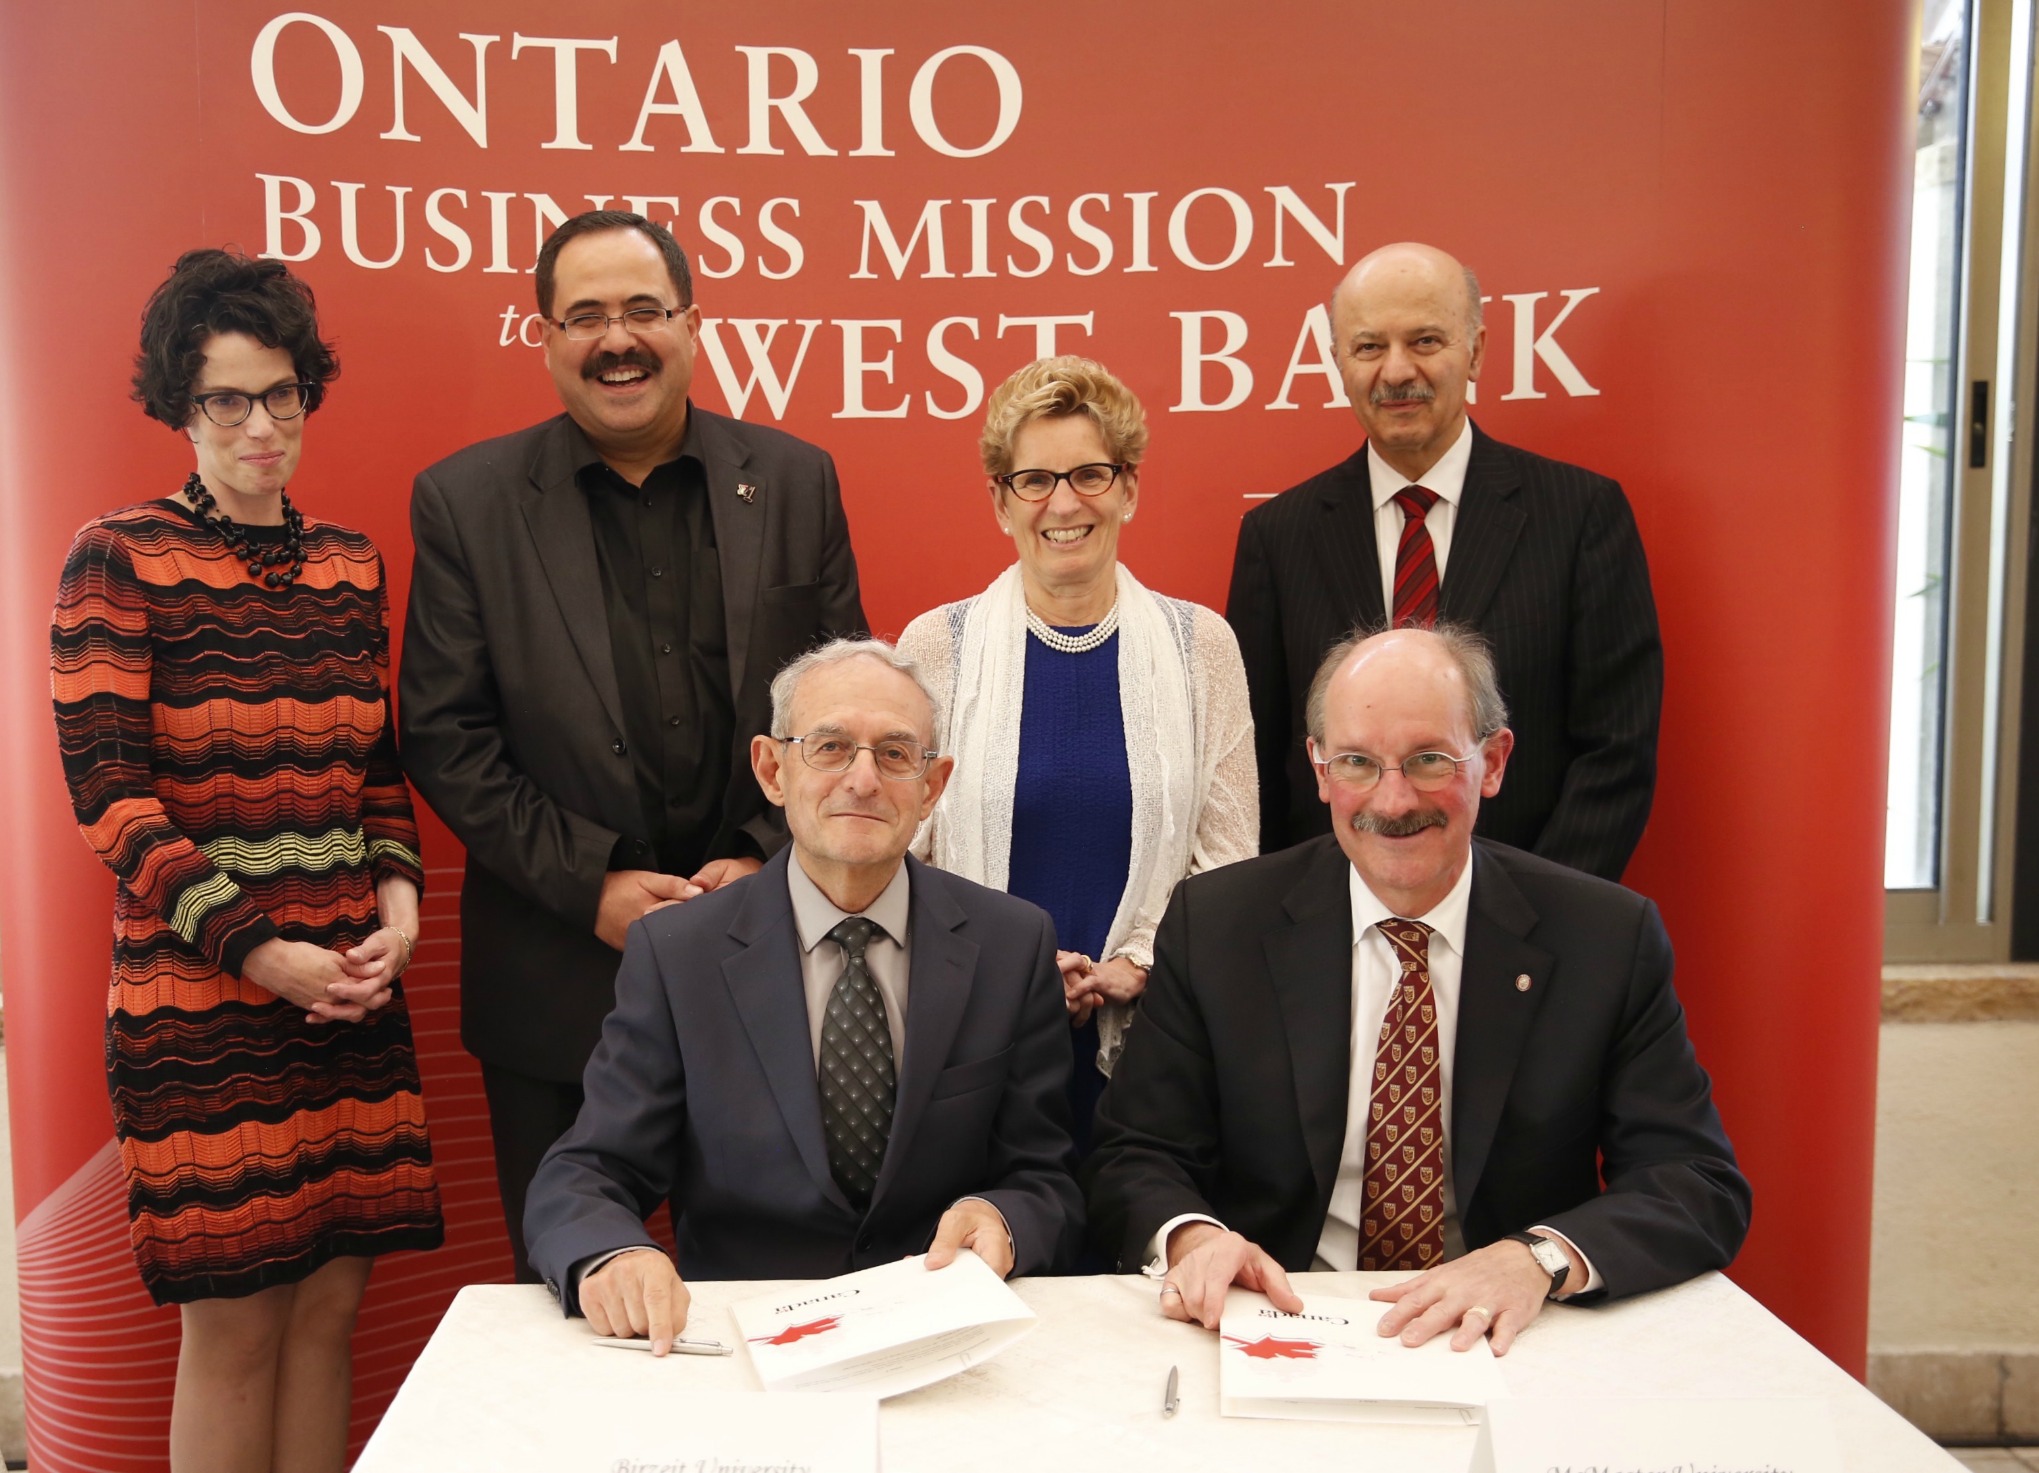 Mascher (bottom row, right) signs a Memorandum of Understanding with Mohammad Al Amleh, Vice-President for Academic Affairs of An-Najah National University (bottom row, left). They were joined by Ontario Premier Kathleen Wynne and Reza Moridi, Ontario Minister of Research and Innovation and Minister of Training, Colleges and Universities (top row, right).